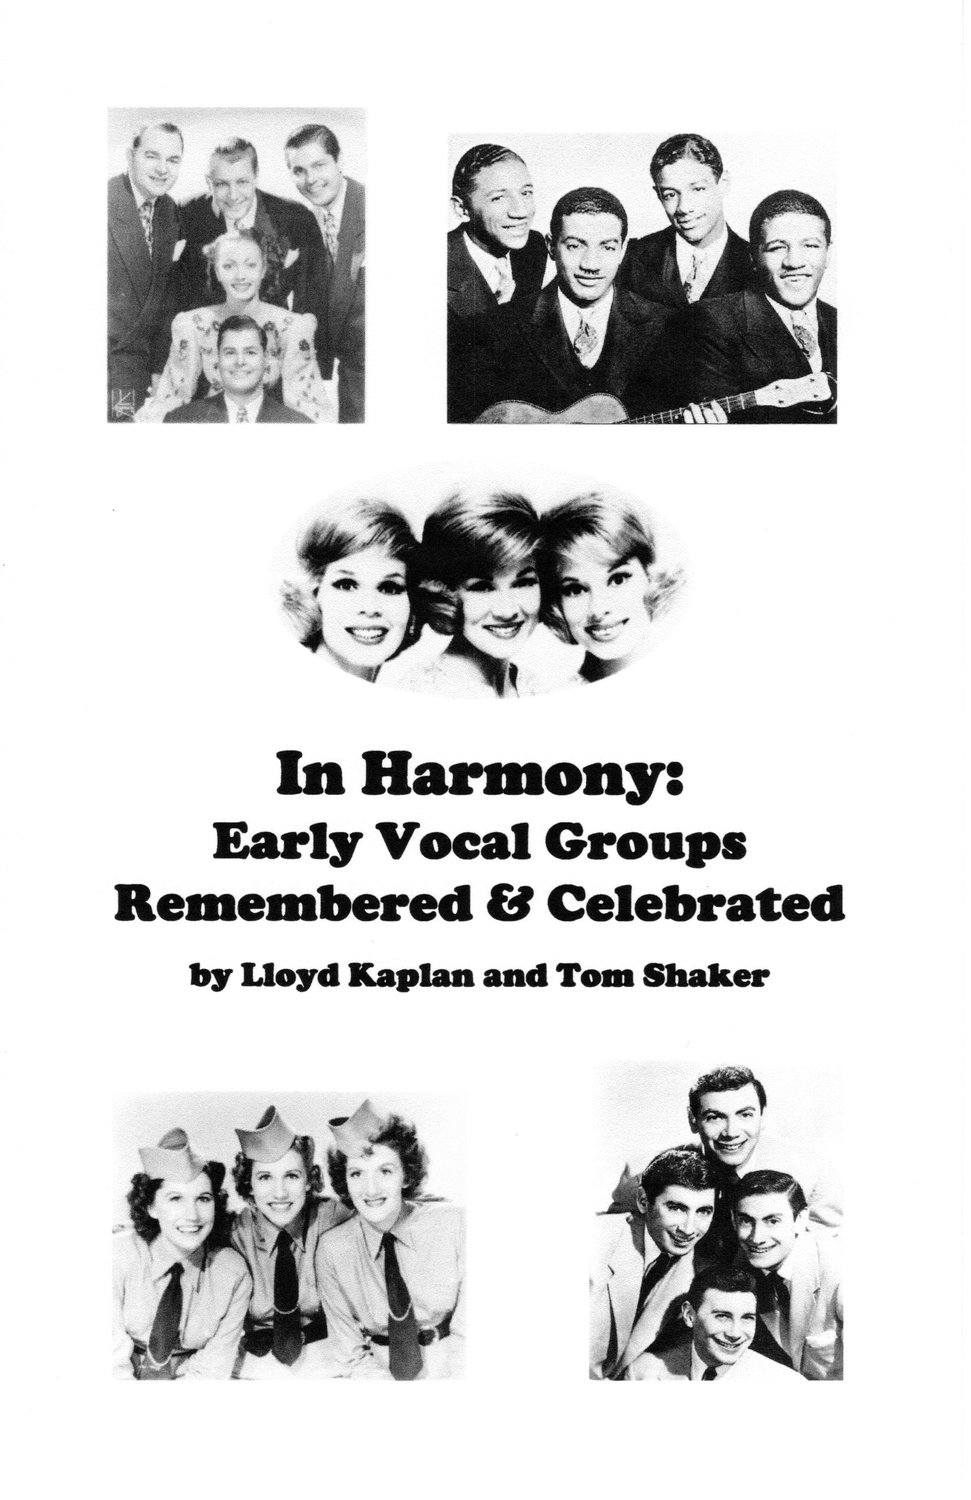 The cover of the new book  “In Harmony: Early Vocal Groups Remembered & Celebrated.”